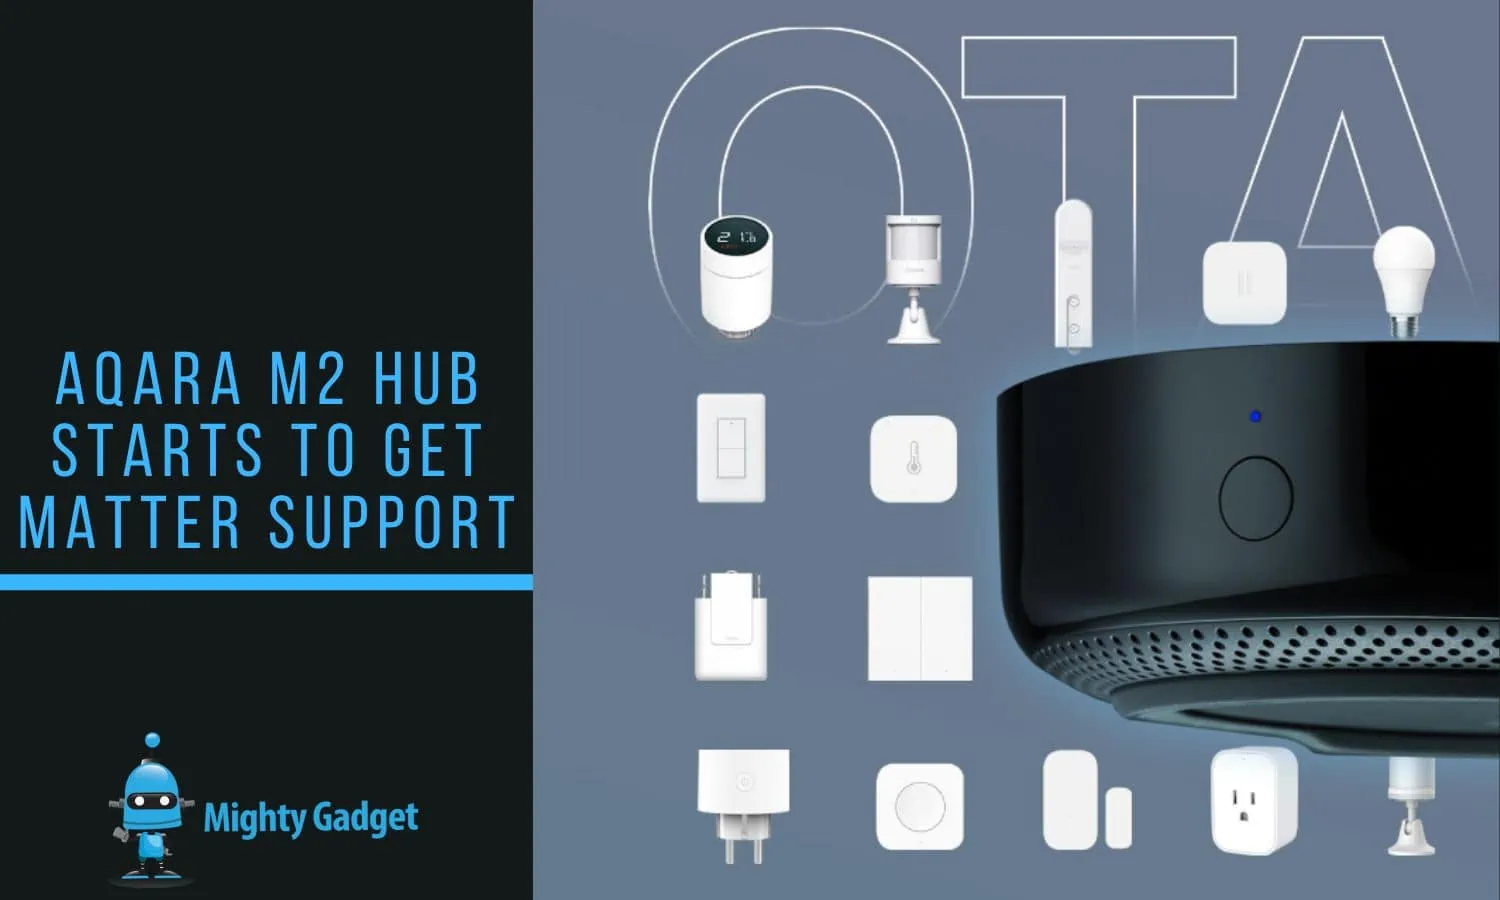 Aqara M2 Hub Starts to get Matter Support with V4 Firmware